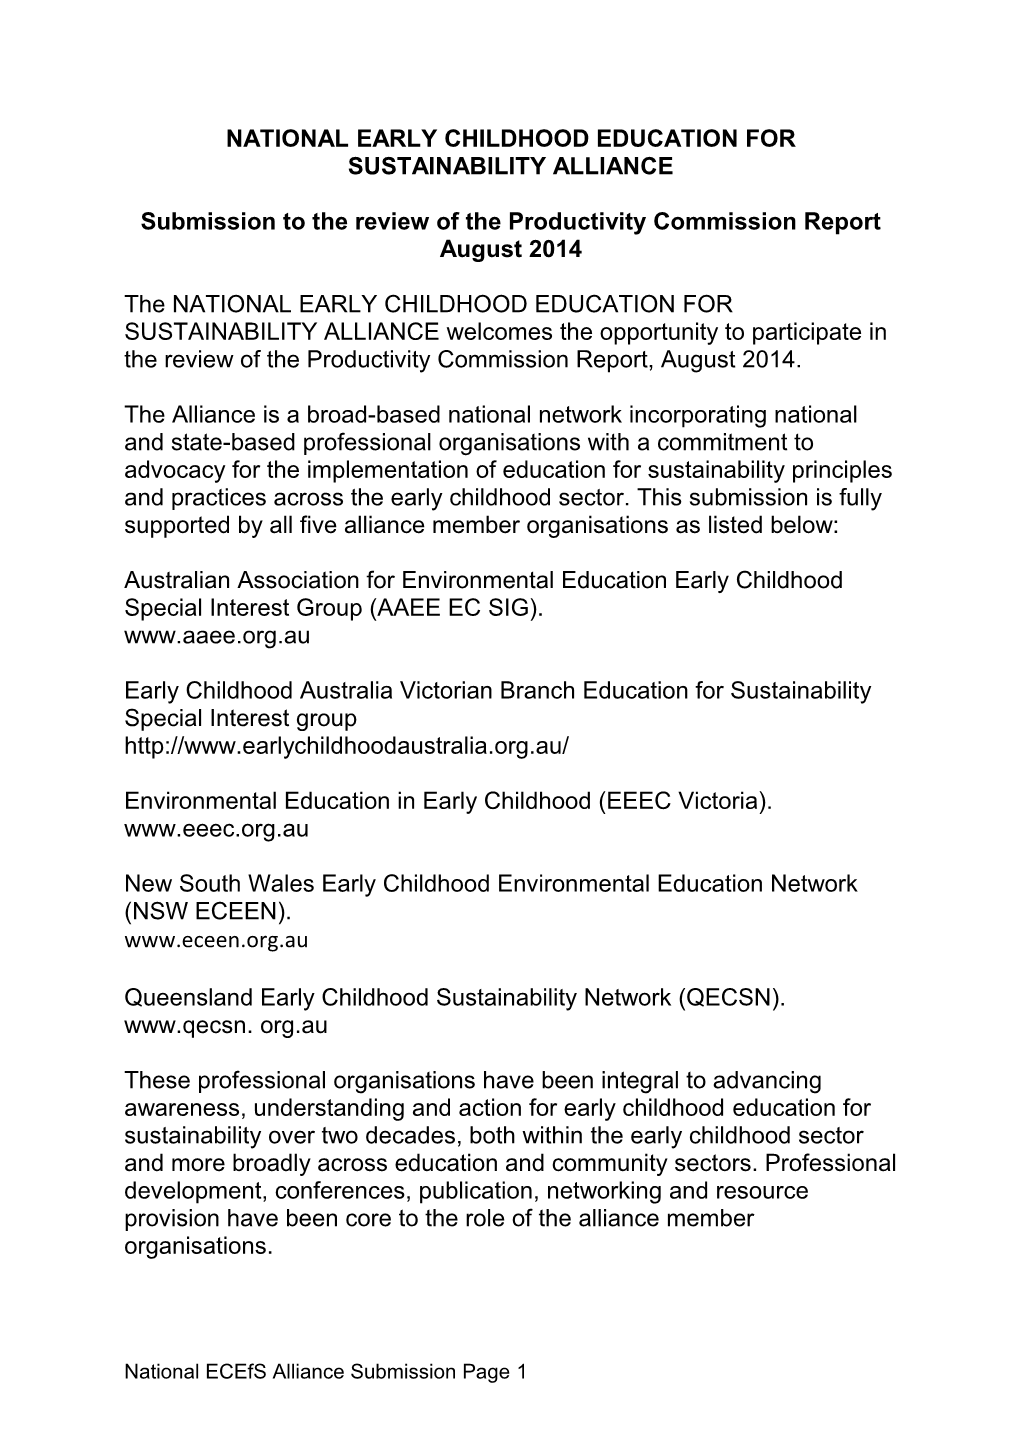 Submission DR789 - National Early Childhood Education for Sustainability Alliance - Childcare